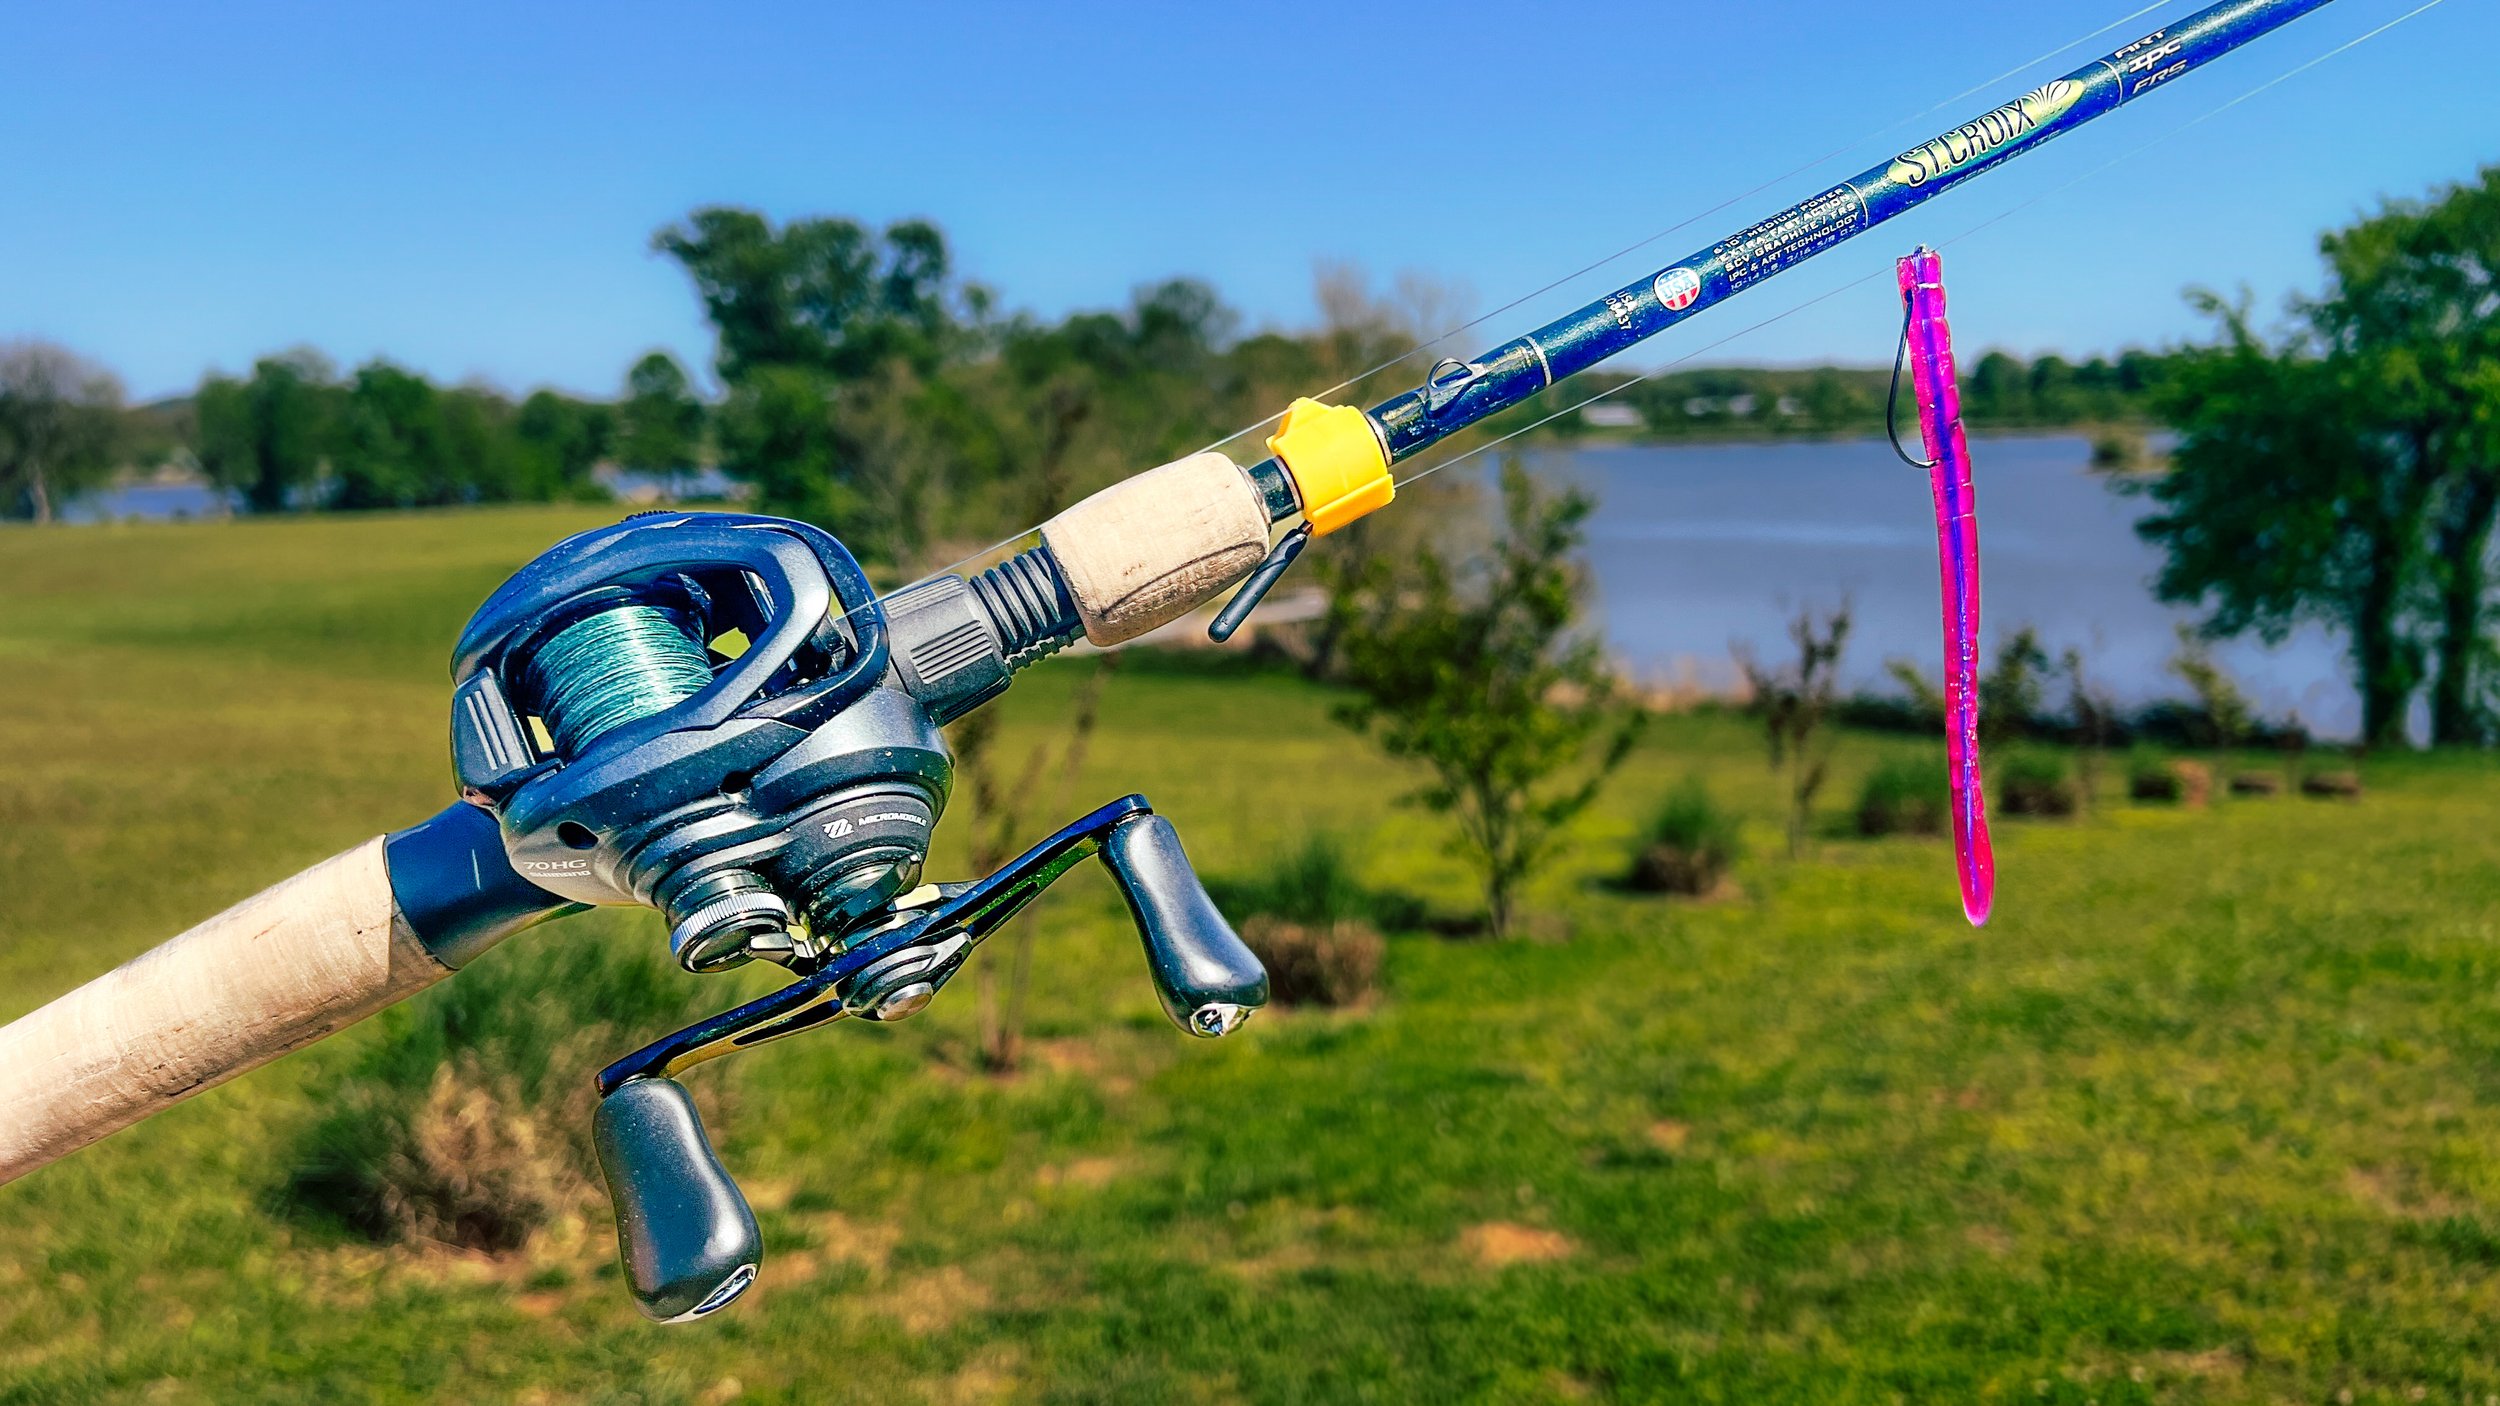 Simple Ned Rig Tricks For Summer Bass Fishing! — Tactical Bassin